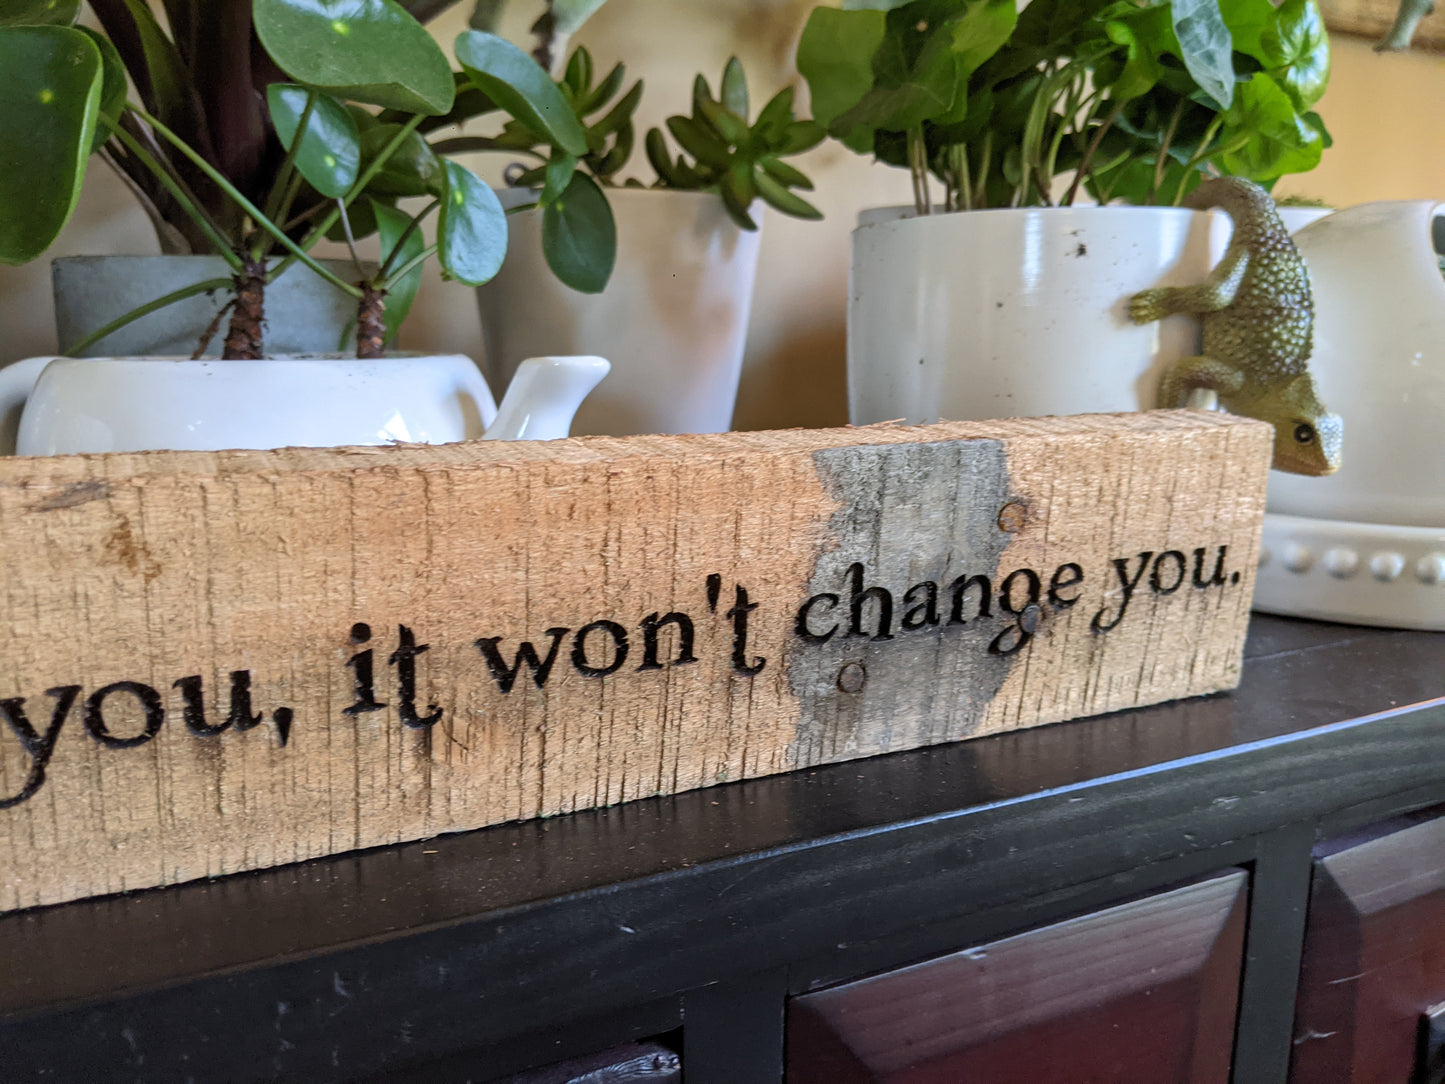 Challenge to change quote wood sign